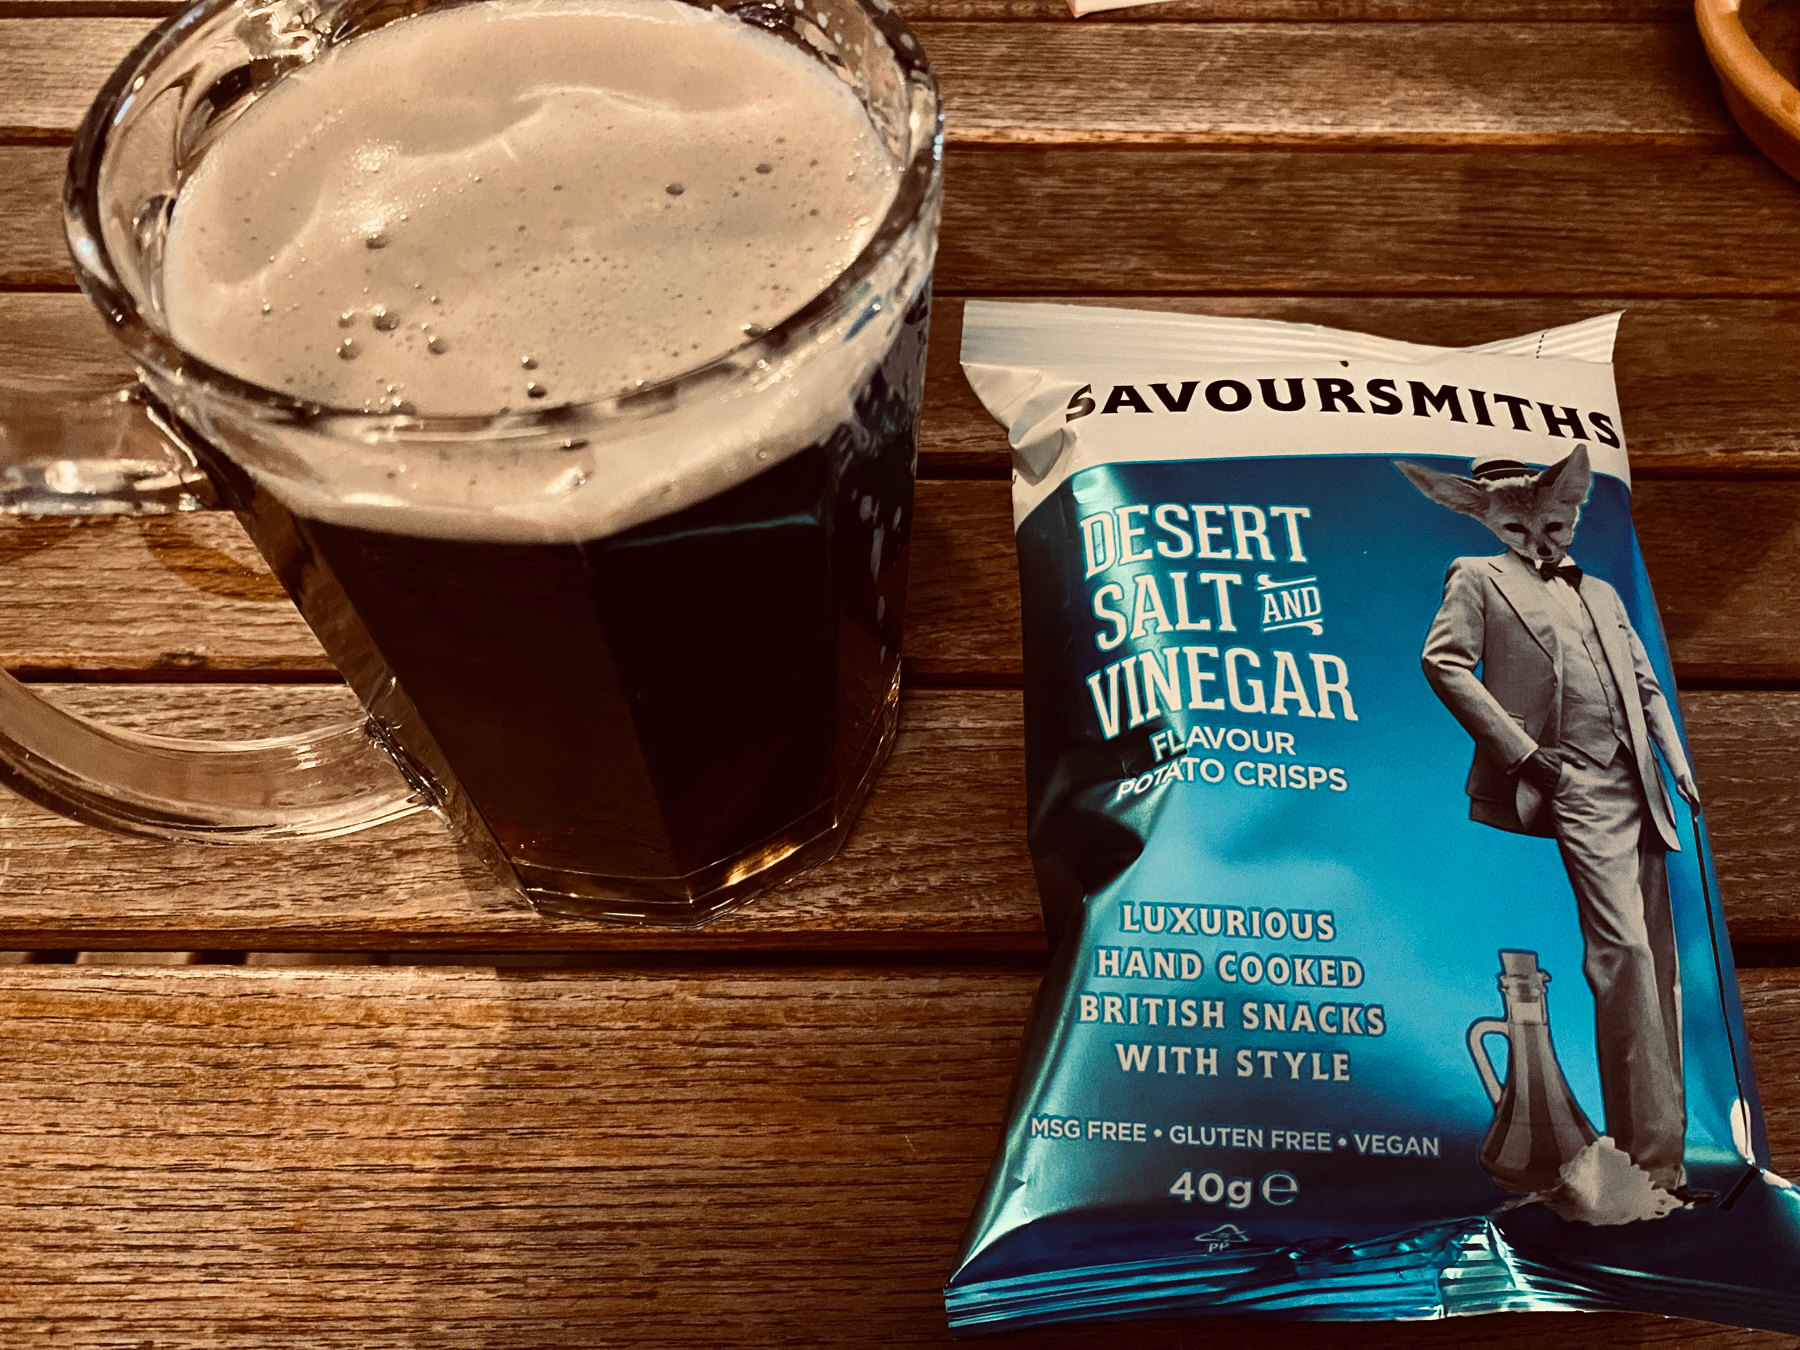 Pint glass of dark beer next to a packet of crisps